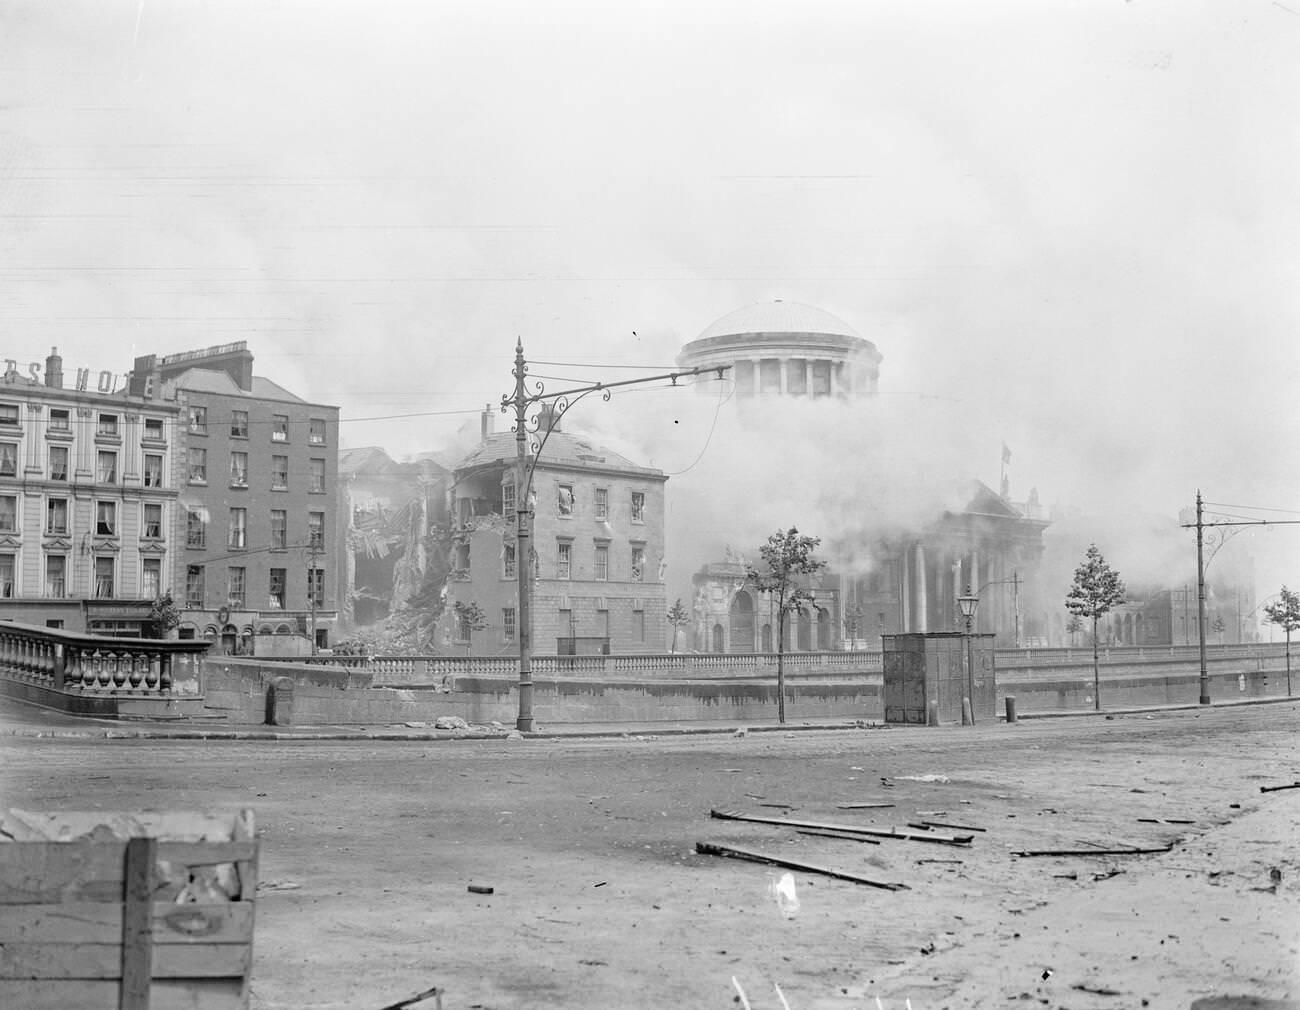 The Four Courts in Dublin ablaze after an explosion during the Irish Civil War, 1922.